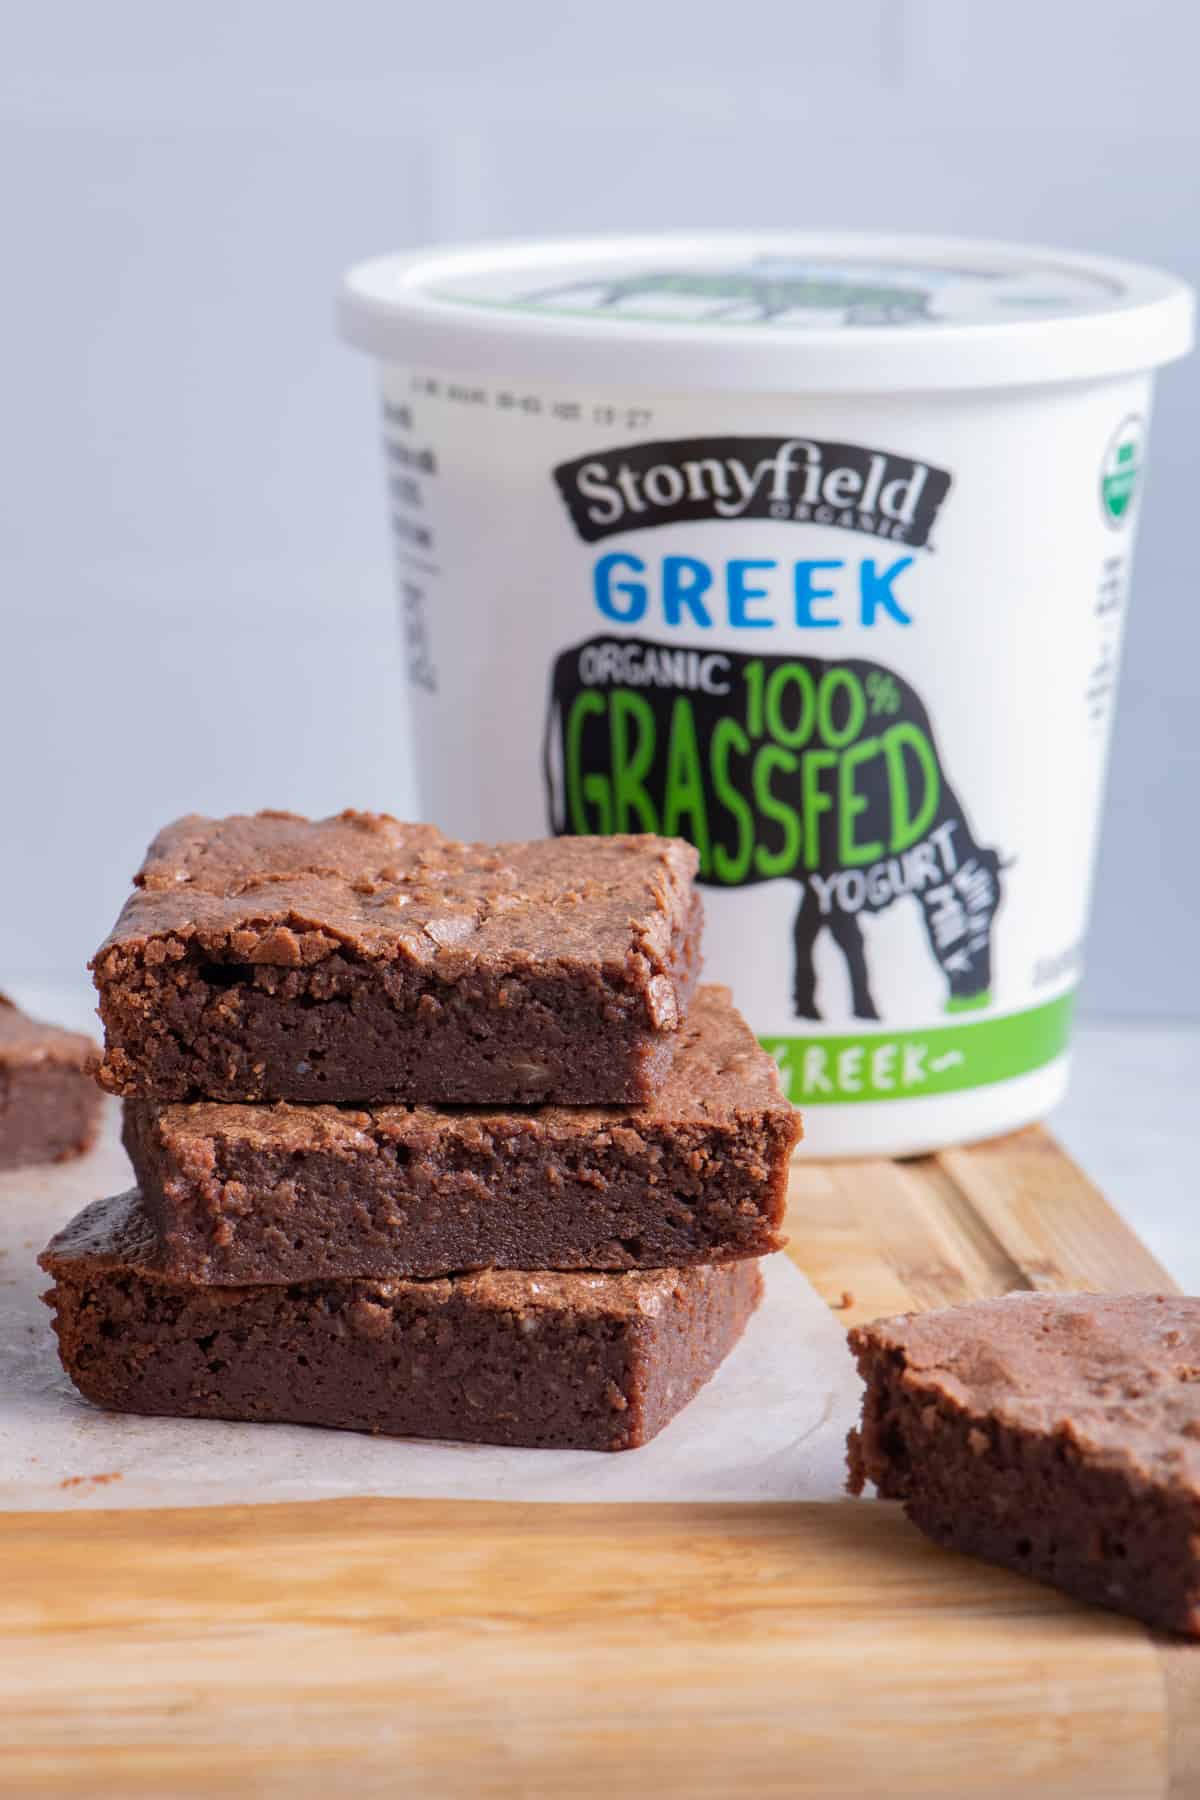 Stack of 3 brownies made made with Stonyfield organic yogurt